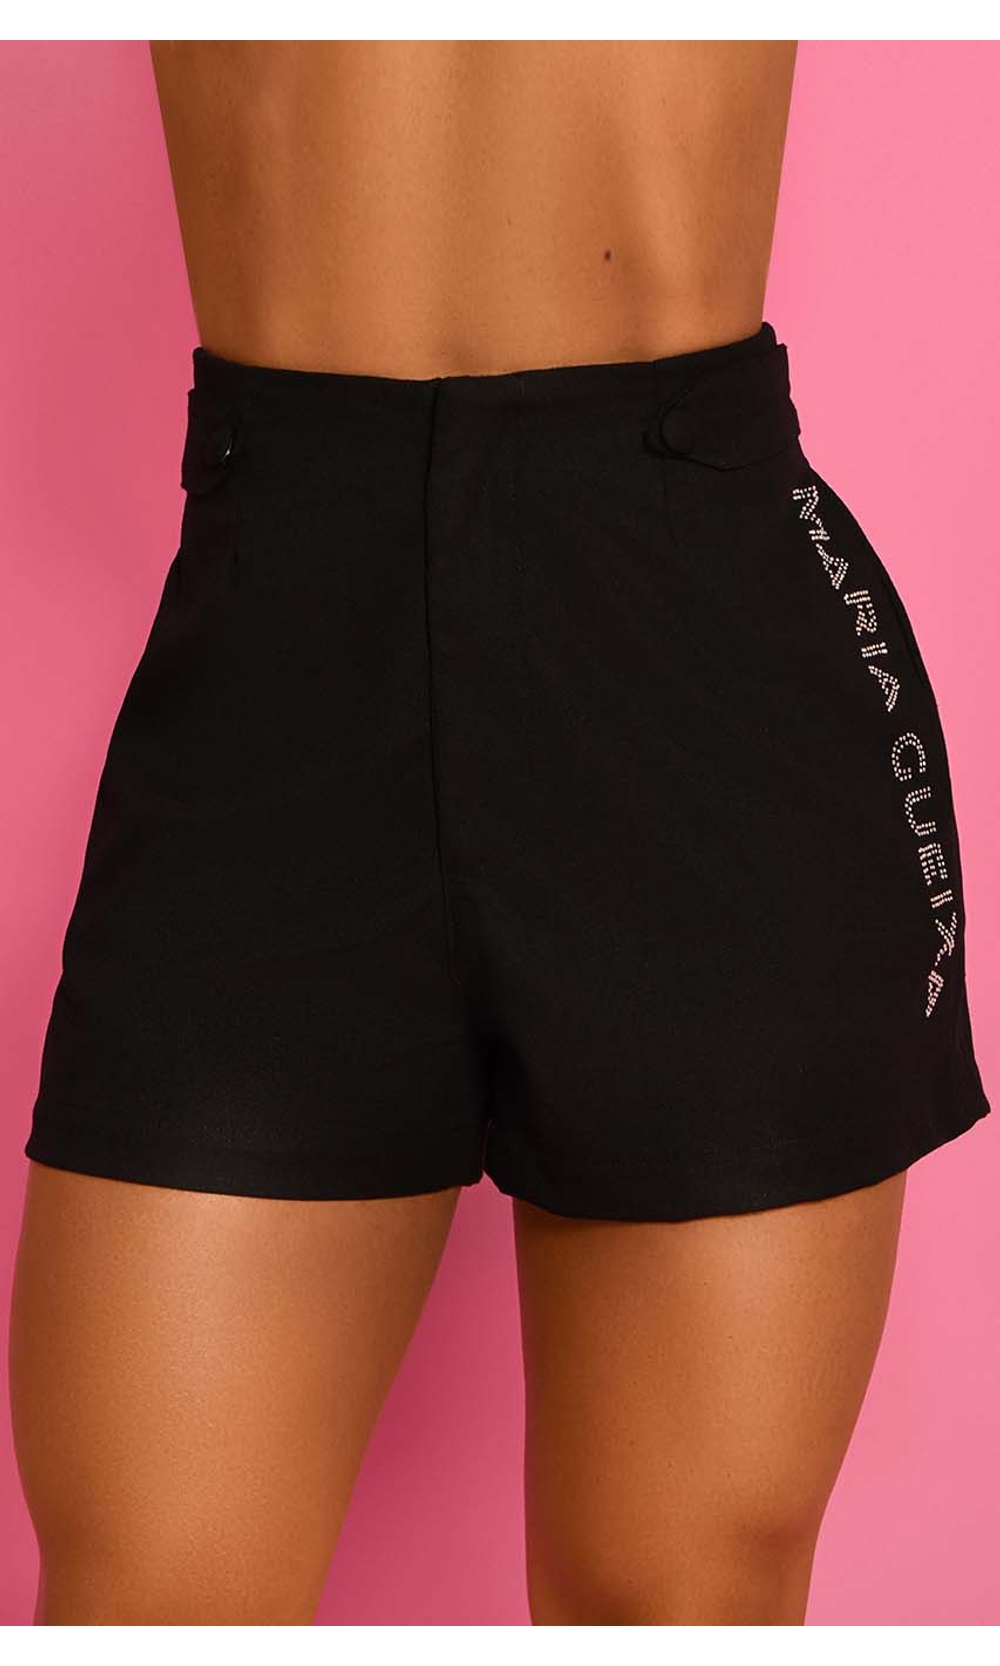 Shorts in glossy black with mesh inserts and zip line Maria Gueixa.